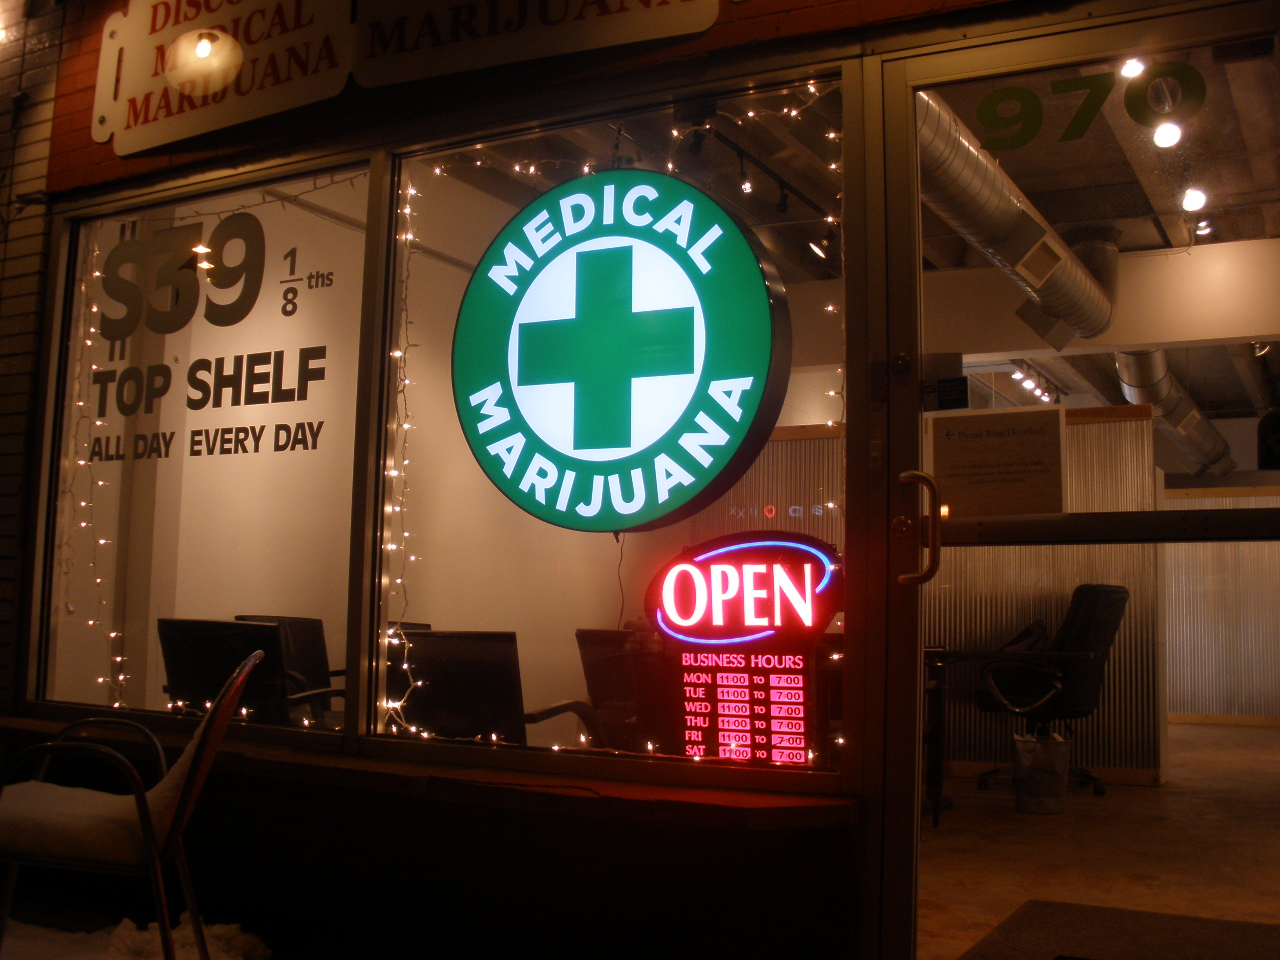 Dispensaries: A Boon to the Medical Cannabis Community